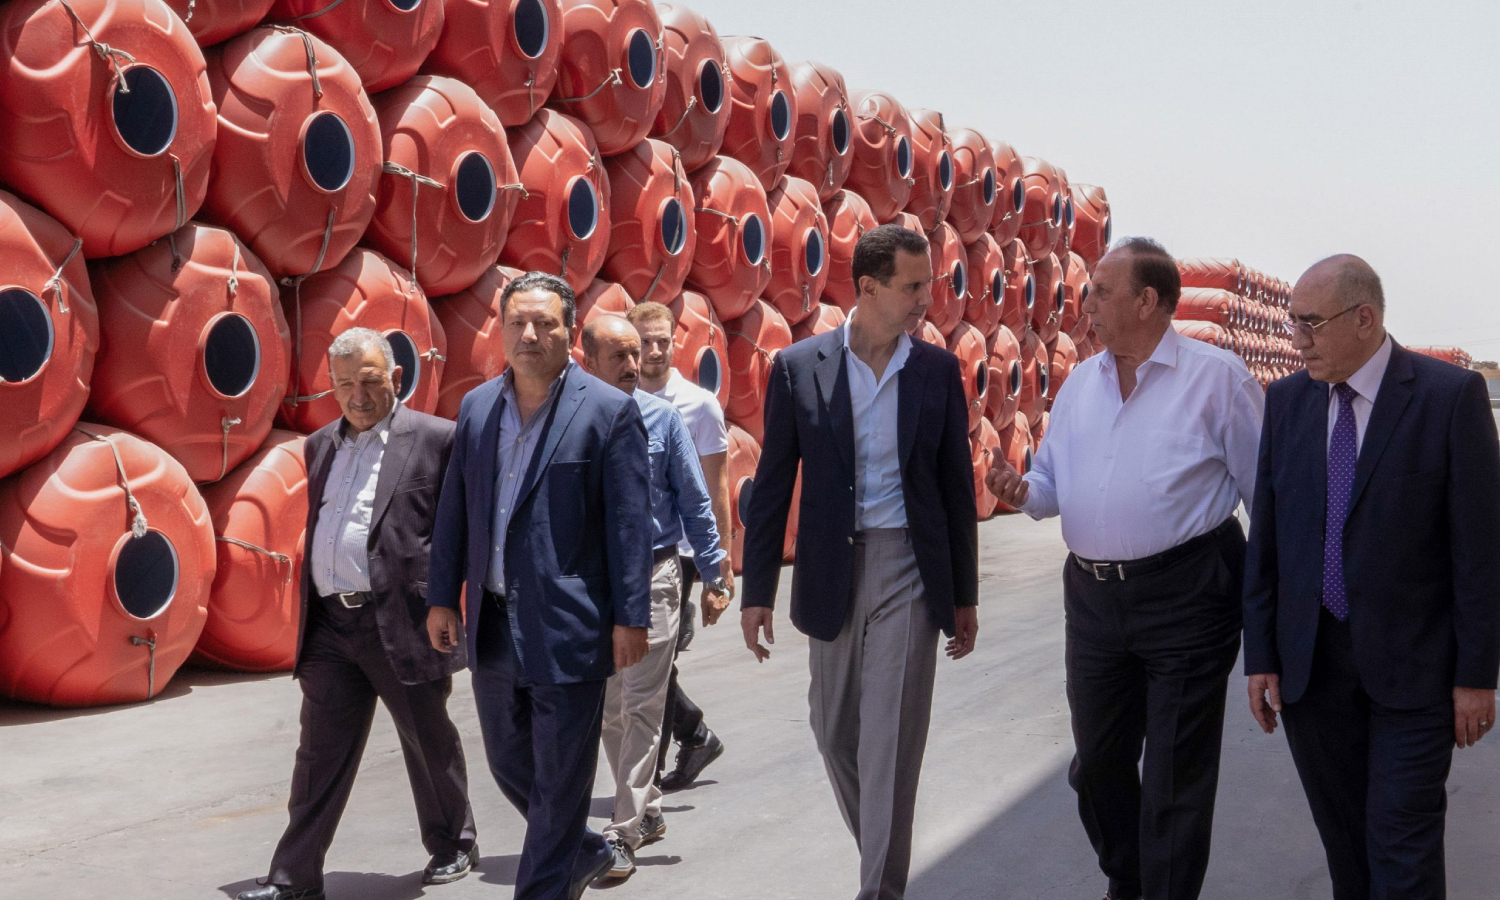 The head of the Syrian regime, Bashar al-Assad, along with some businessmen in the industrial city of Adra(SANA)